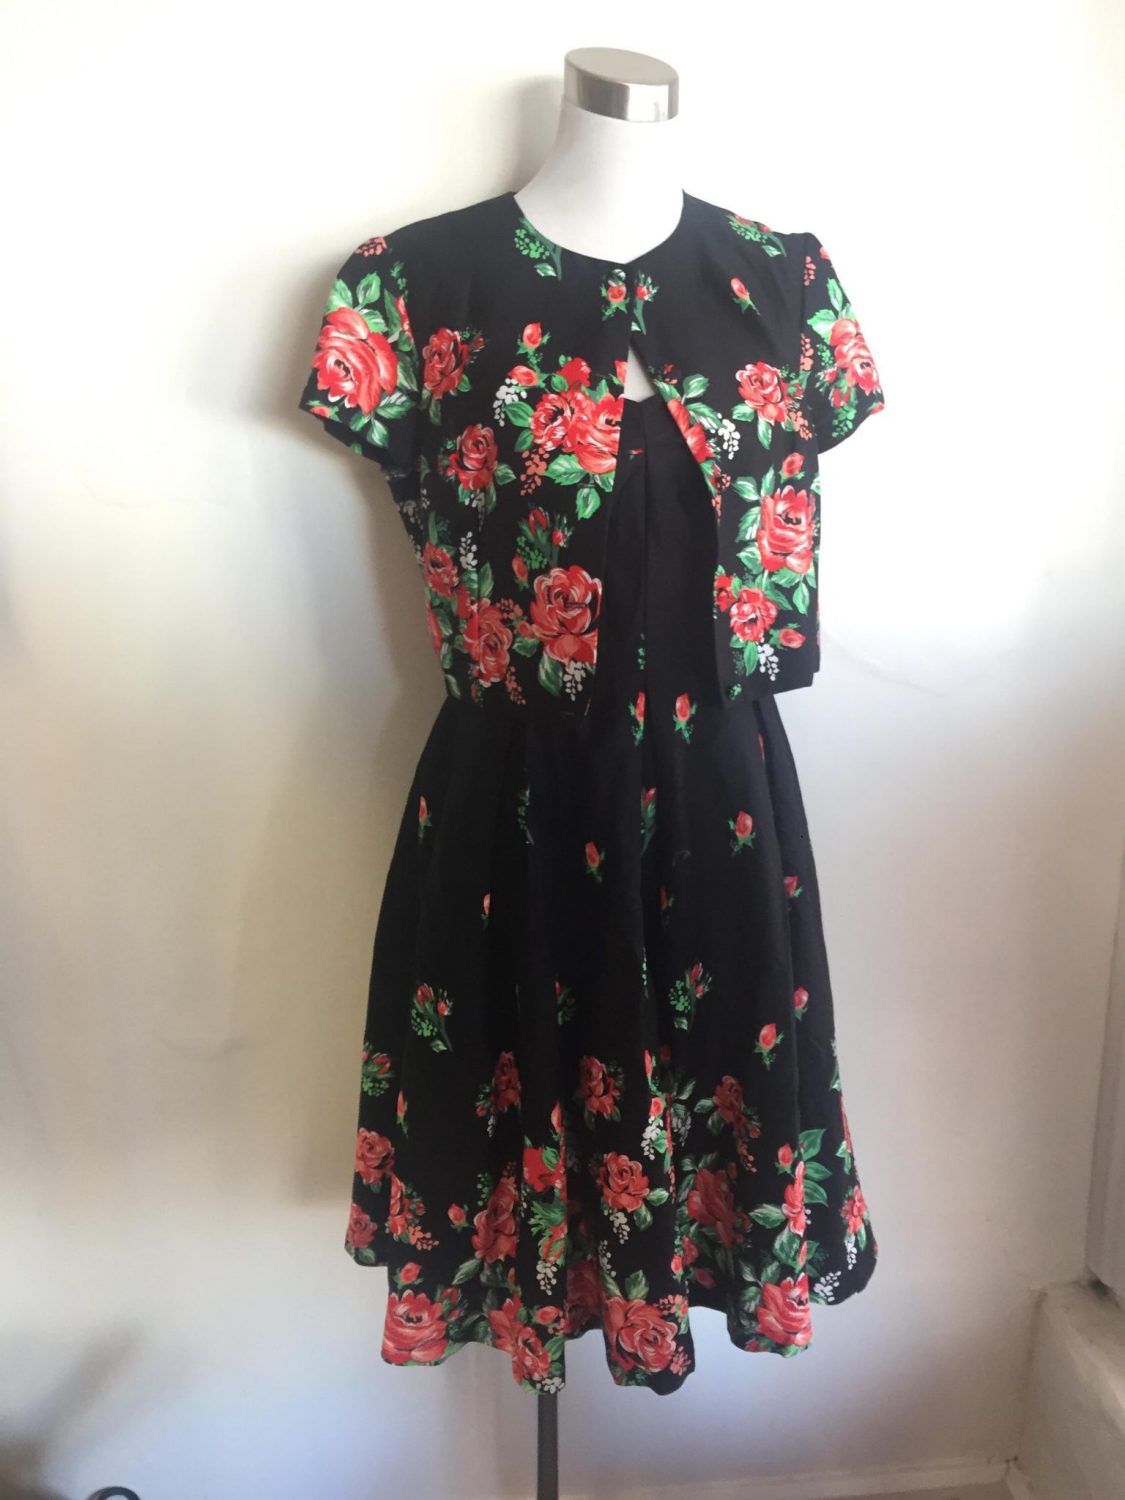 LINDY BOP 1950S STYLE REPRODUCTION BLACK FLORAL DRESS WITH MATCHING ...